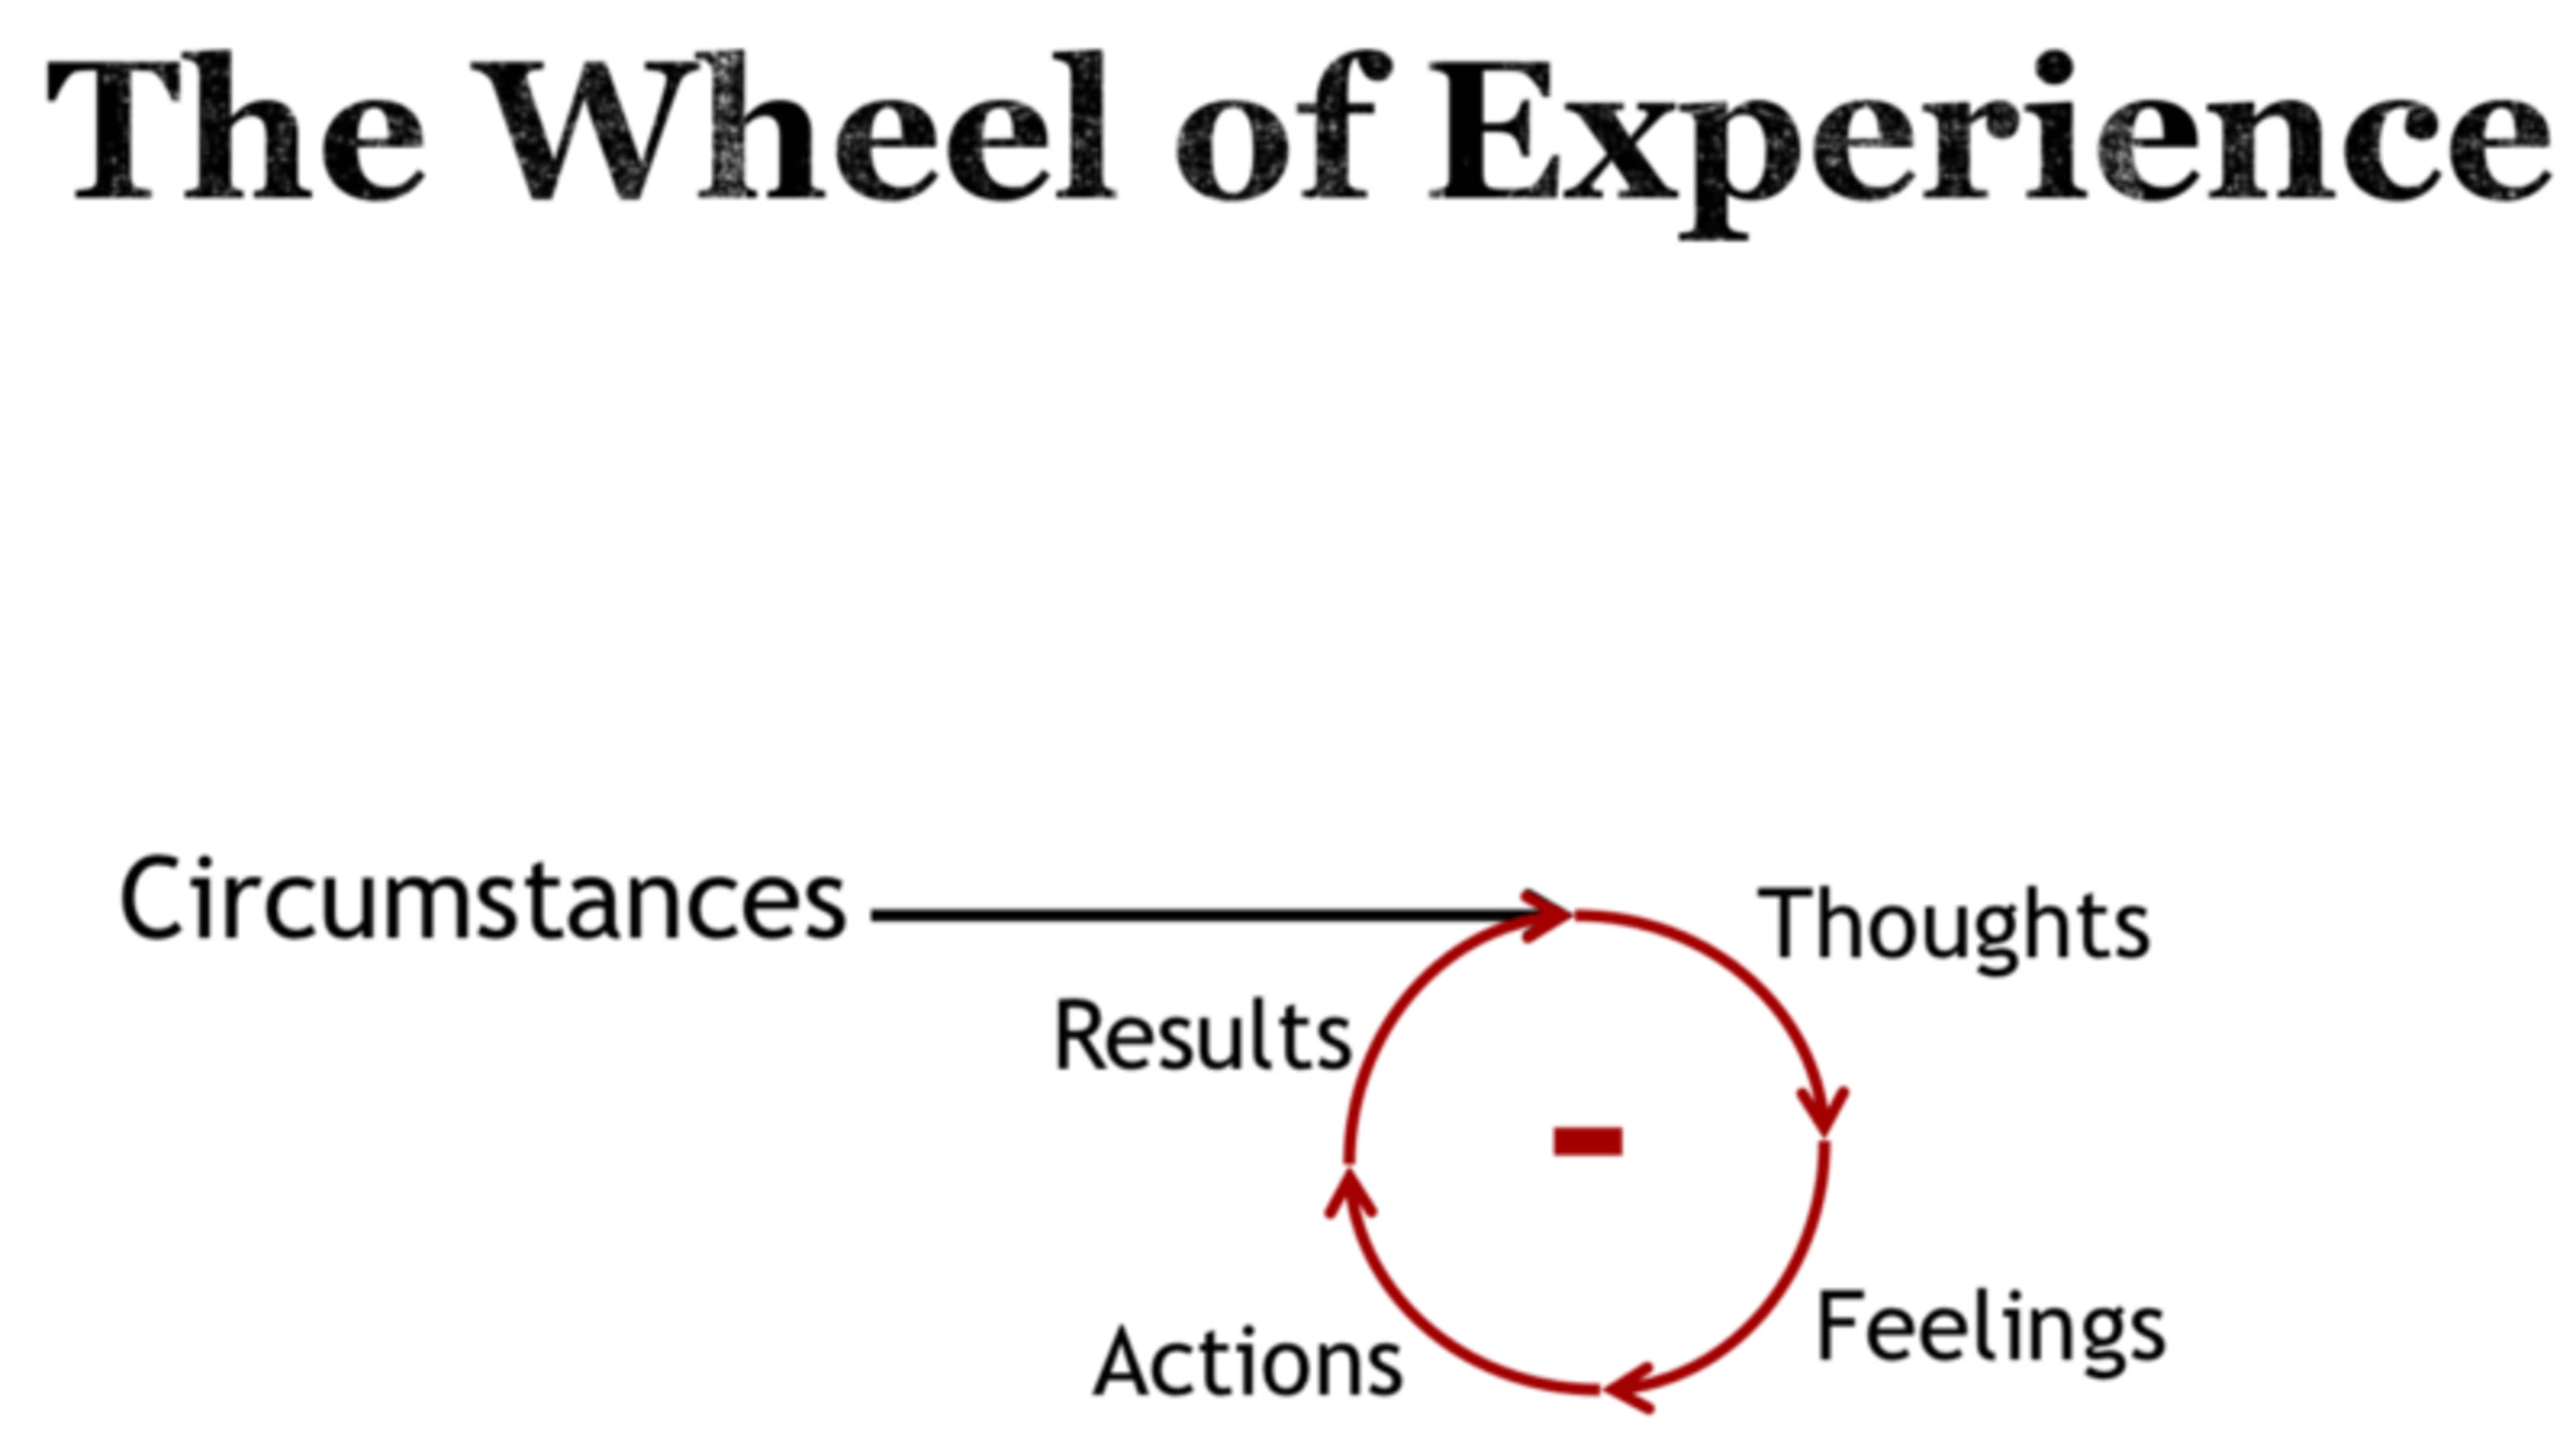 The Wheel of Experience: Negative